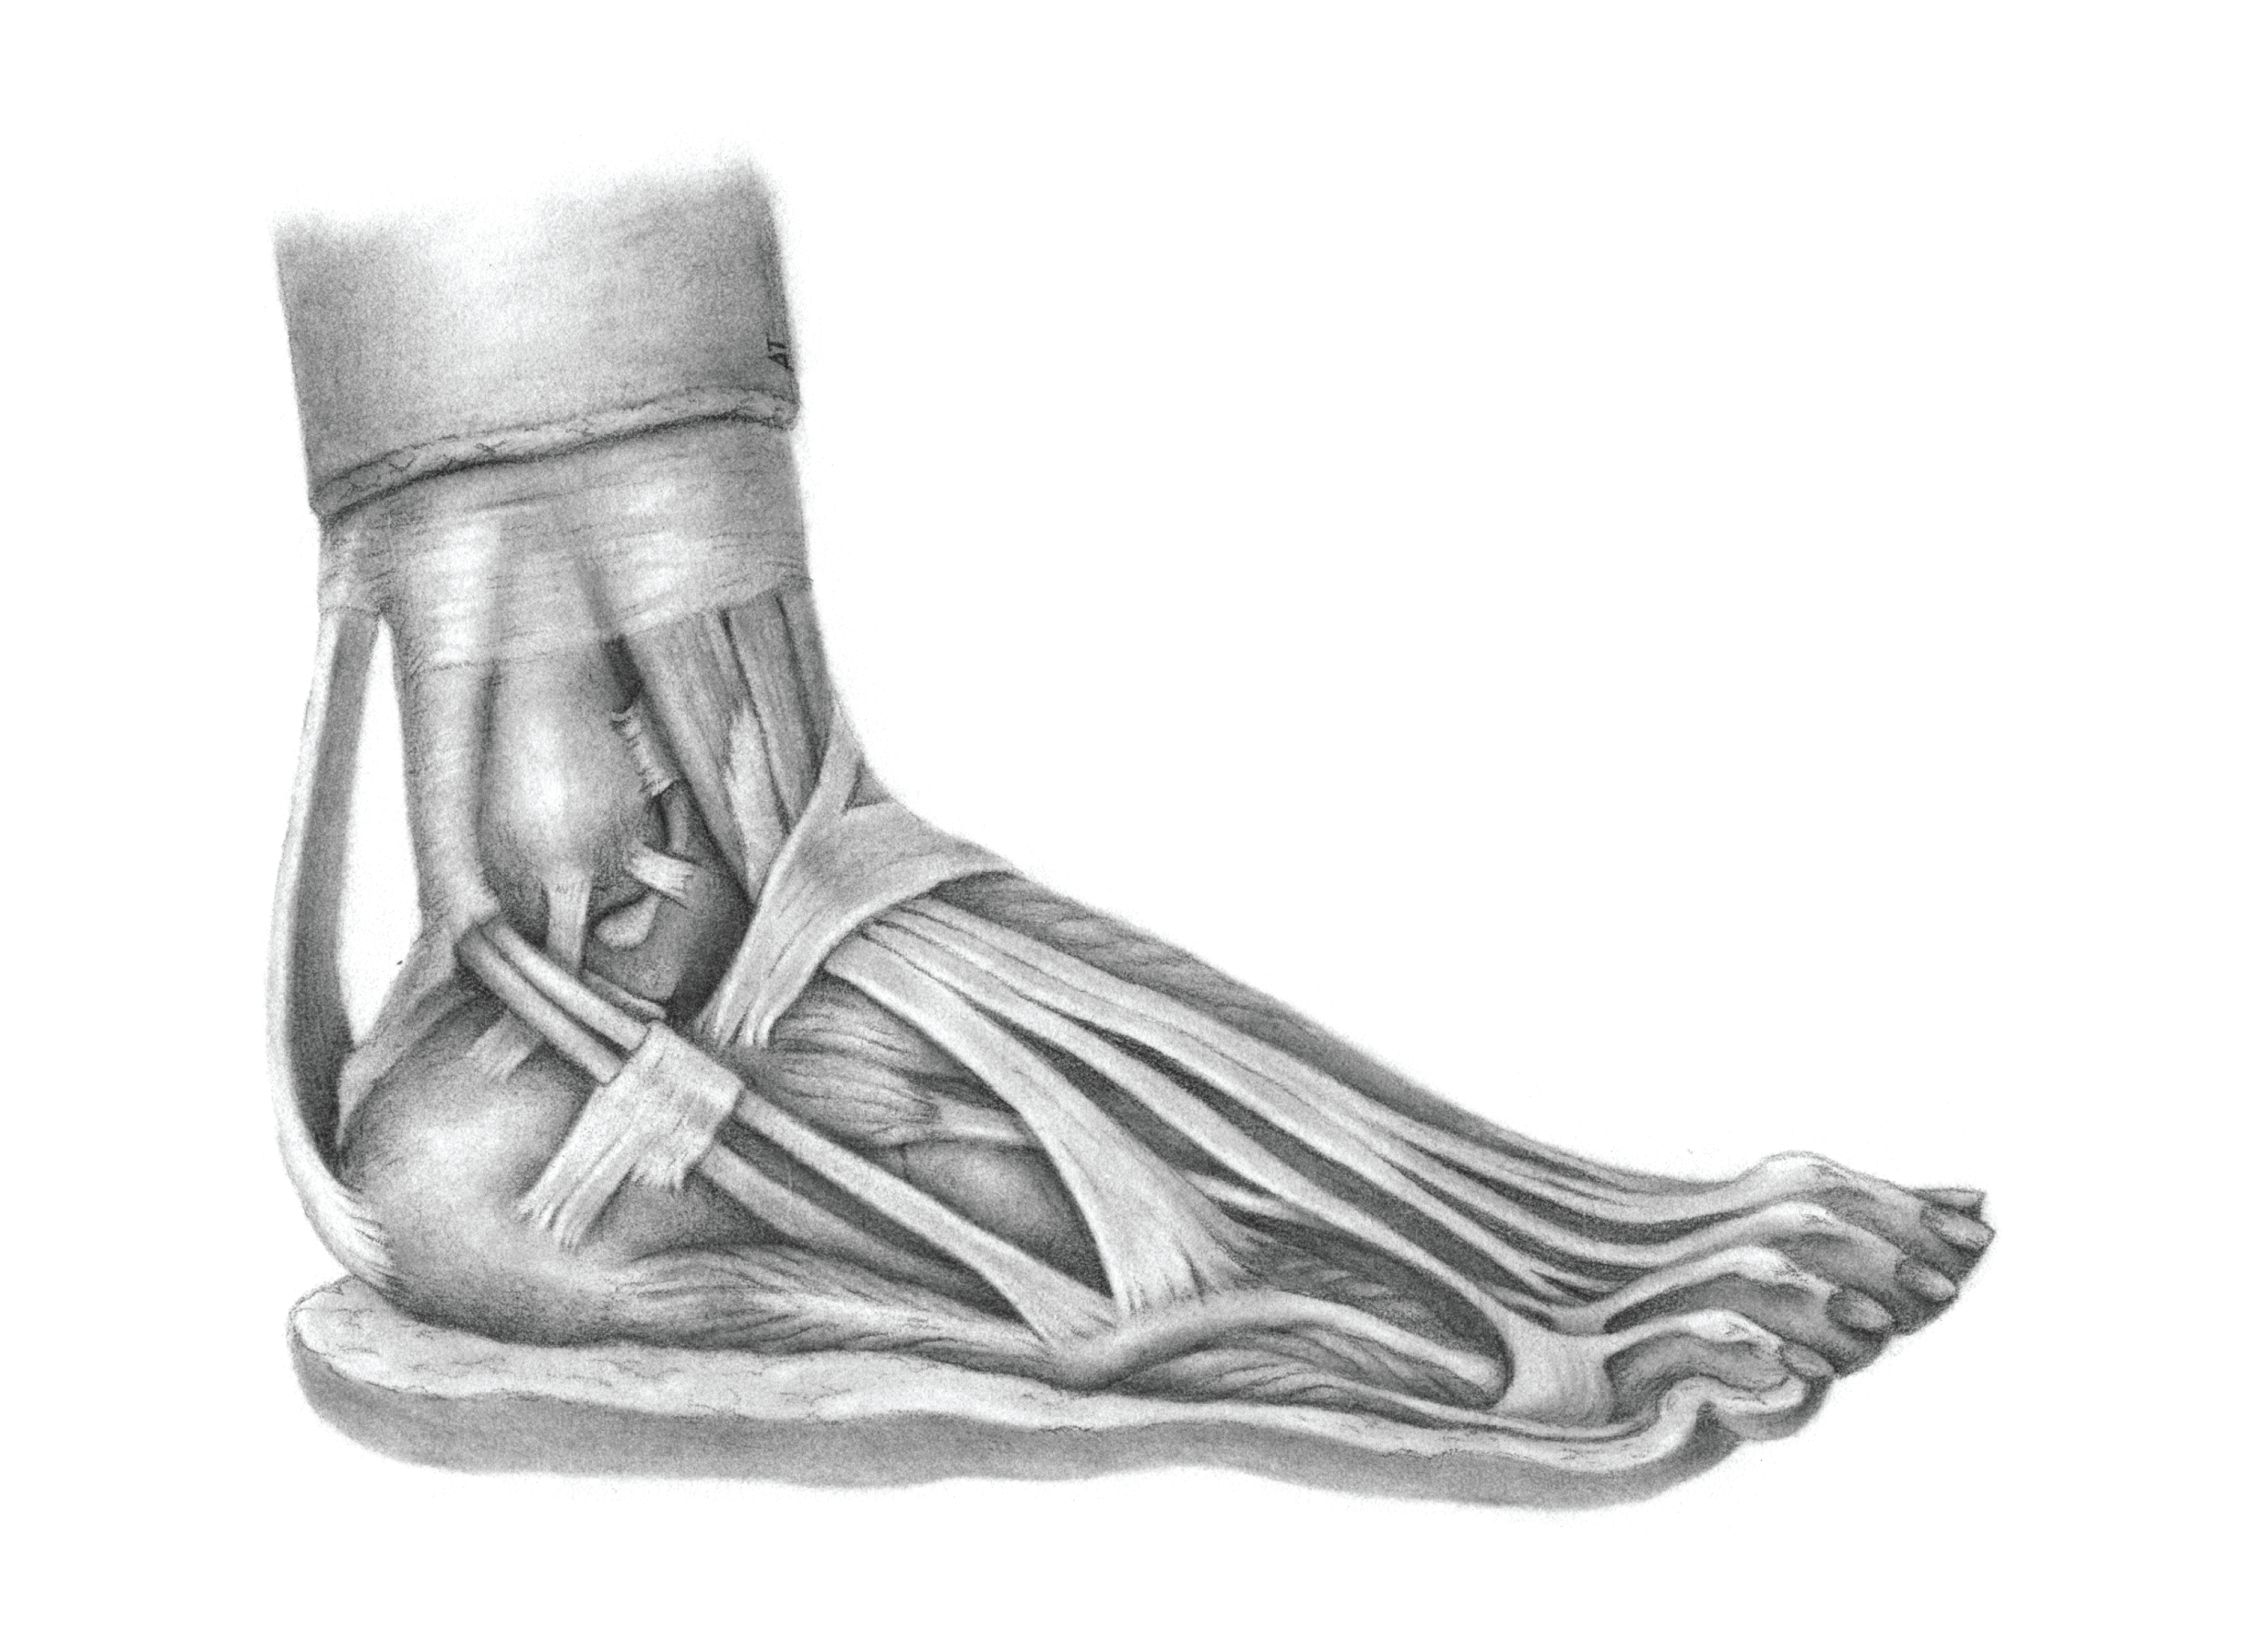 lateral foot